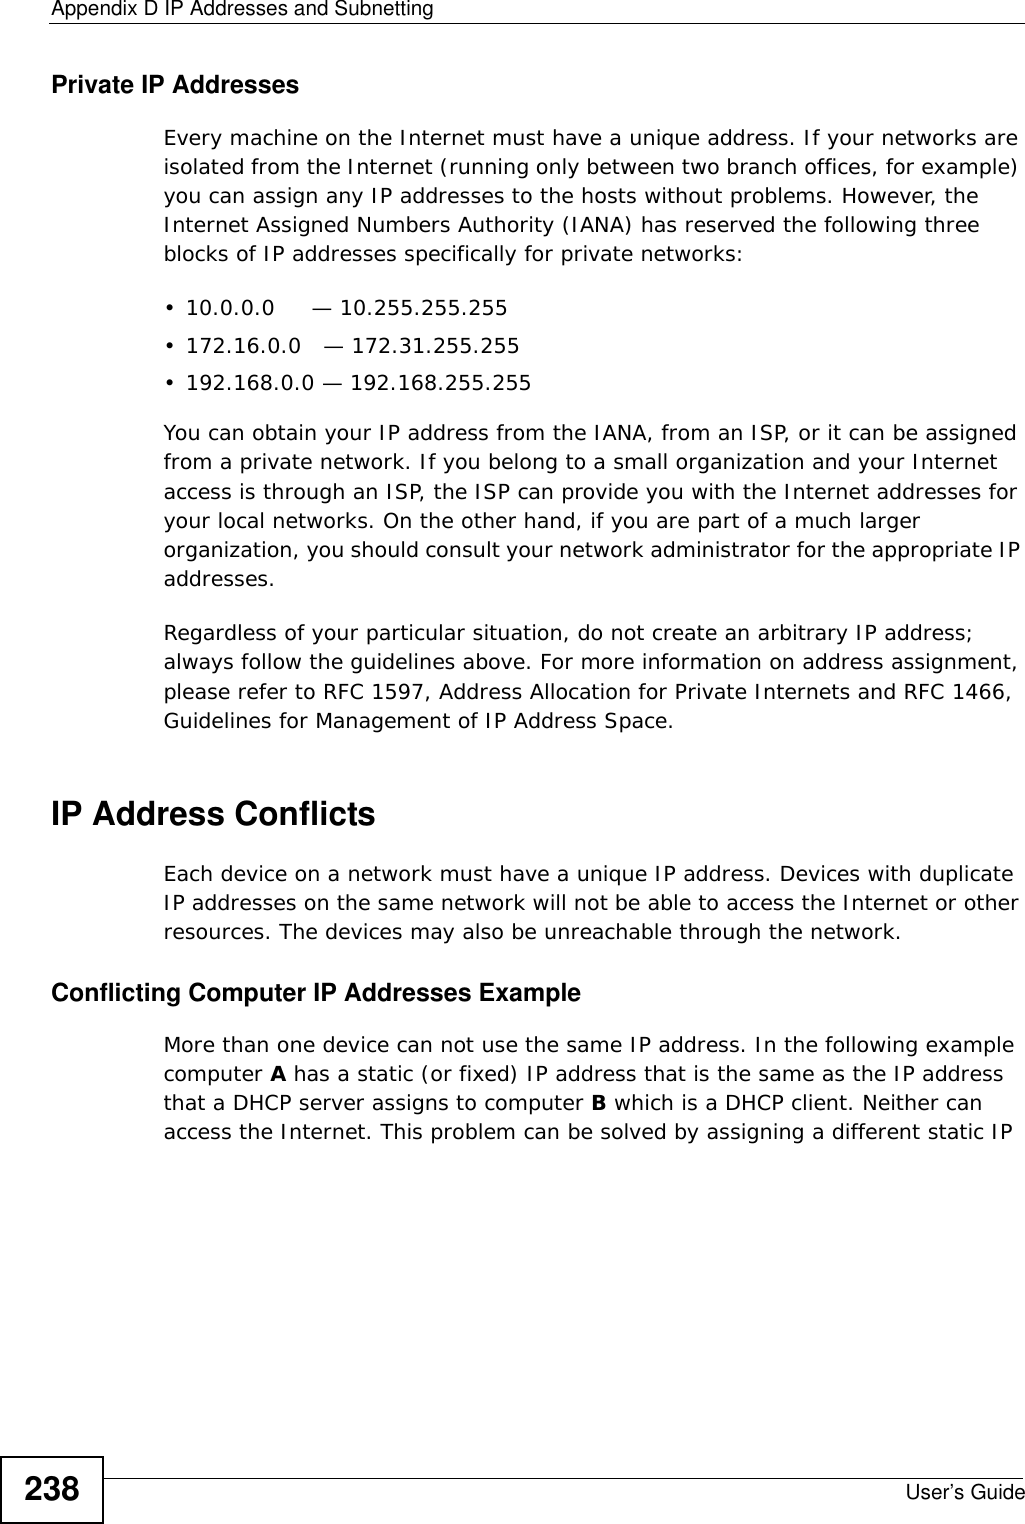 Appendix D IP Addresses and SubnettingUser’s Guide238Private IP AddressesEvery machine on the Internet must have a unique address. If your networks are isolated from the Internet (running only between two branch offices, for example) you can assign any IP addresses to the hosts without problems. However, the Internet Assigned Numbers Authority (IANA) has reserved the following three blocks of IP addresses specifically for private networks:• 10.0.0.0     — 10.255.255.255• 172.16.0.0   — 172.31.255.255• 192.168.0.0 — 192.168.255.255You can obtain your IP address from the IANA, from an ISP, or it can be assigned from a private network. If you belong to a small organization and your Internet access is through an ISP, the ISP can provide you with the Internet addresses for your local networks. On the other hand, if you are part of a much larger organization, you should consult your network administrator for the appropriate IP addresses.Regardless of your particular situation, do not create an arbitrary IP address; always follow the guidelines above. For more information on address assignment, please refer to RFC 1597, Address Allocation for Private Internets and RFC 1466, Guidelines for Management of IP Address Space.IP Address ConflictsEach device on a network must have a unique IP address. Devices with duplicate IP addresses on the same network will not be able to access the Internet or other resources. The devices may also be unreachable through the network. Conflicting Computer IP Addresses ExampleMore than one device can not use the same IP address. In the following example computer A has a static (or fixed) IP address that is the same as the IP address that a DHCP server assigns to computer B which is a DHCP client. Neither can access the Internet. This problem can be solved by assigning a different static IP 